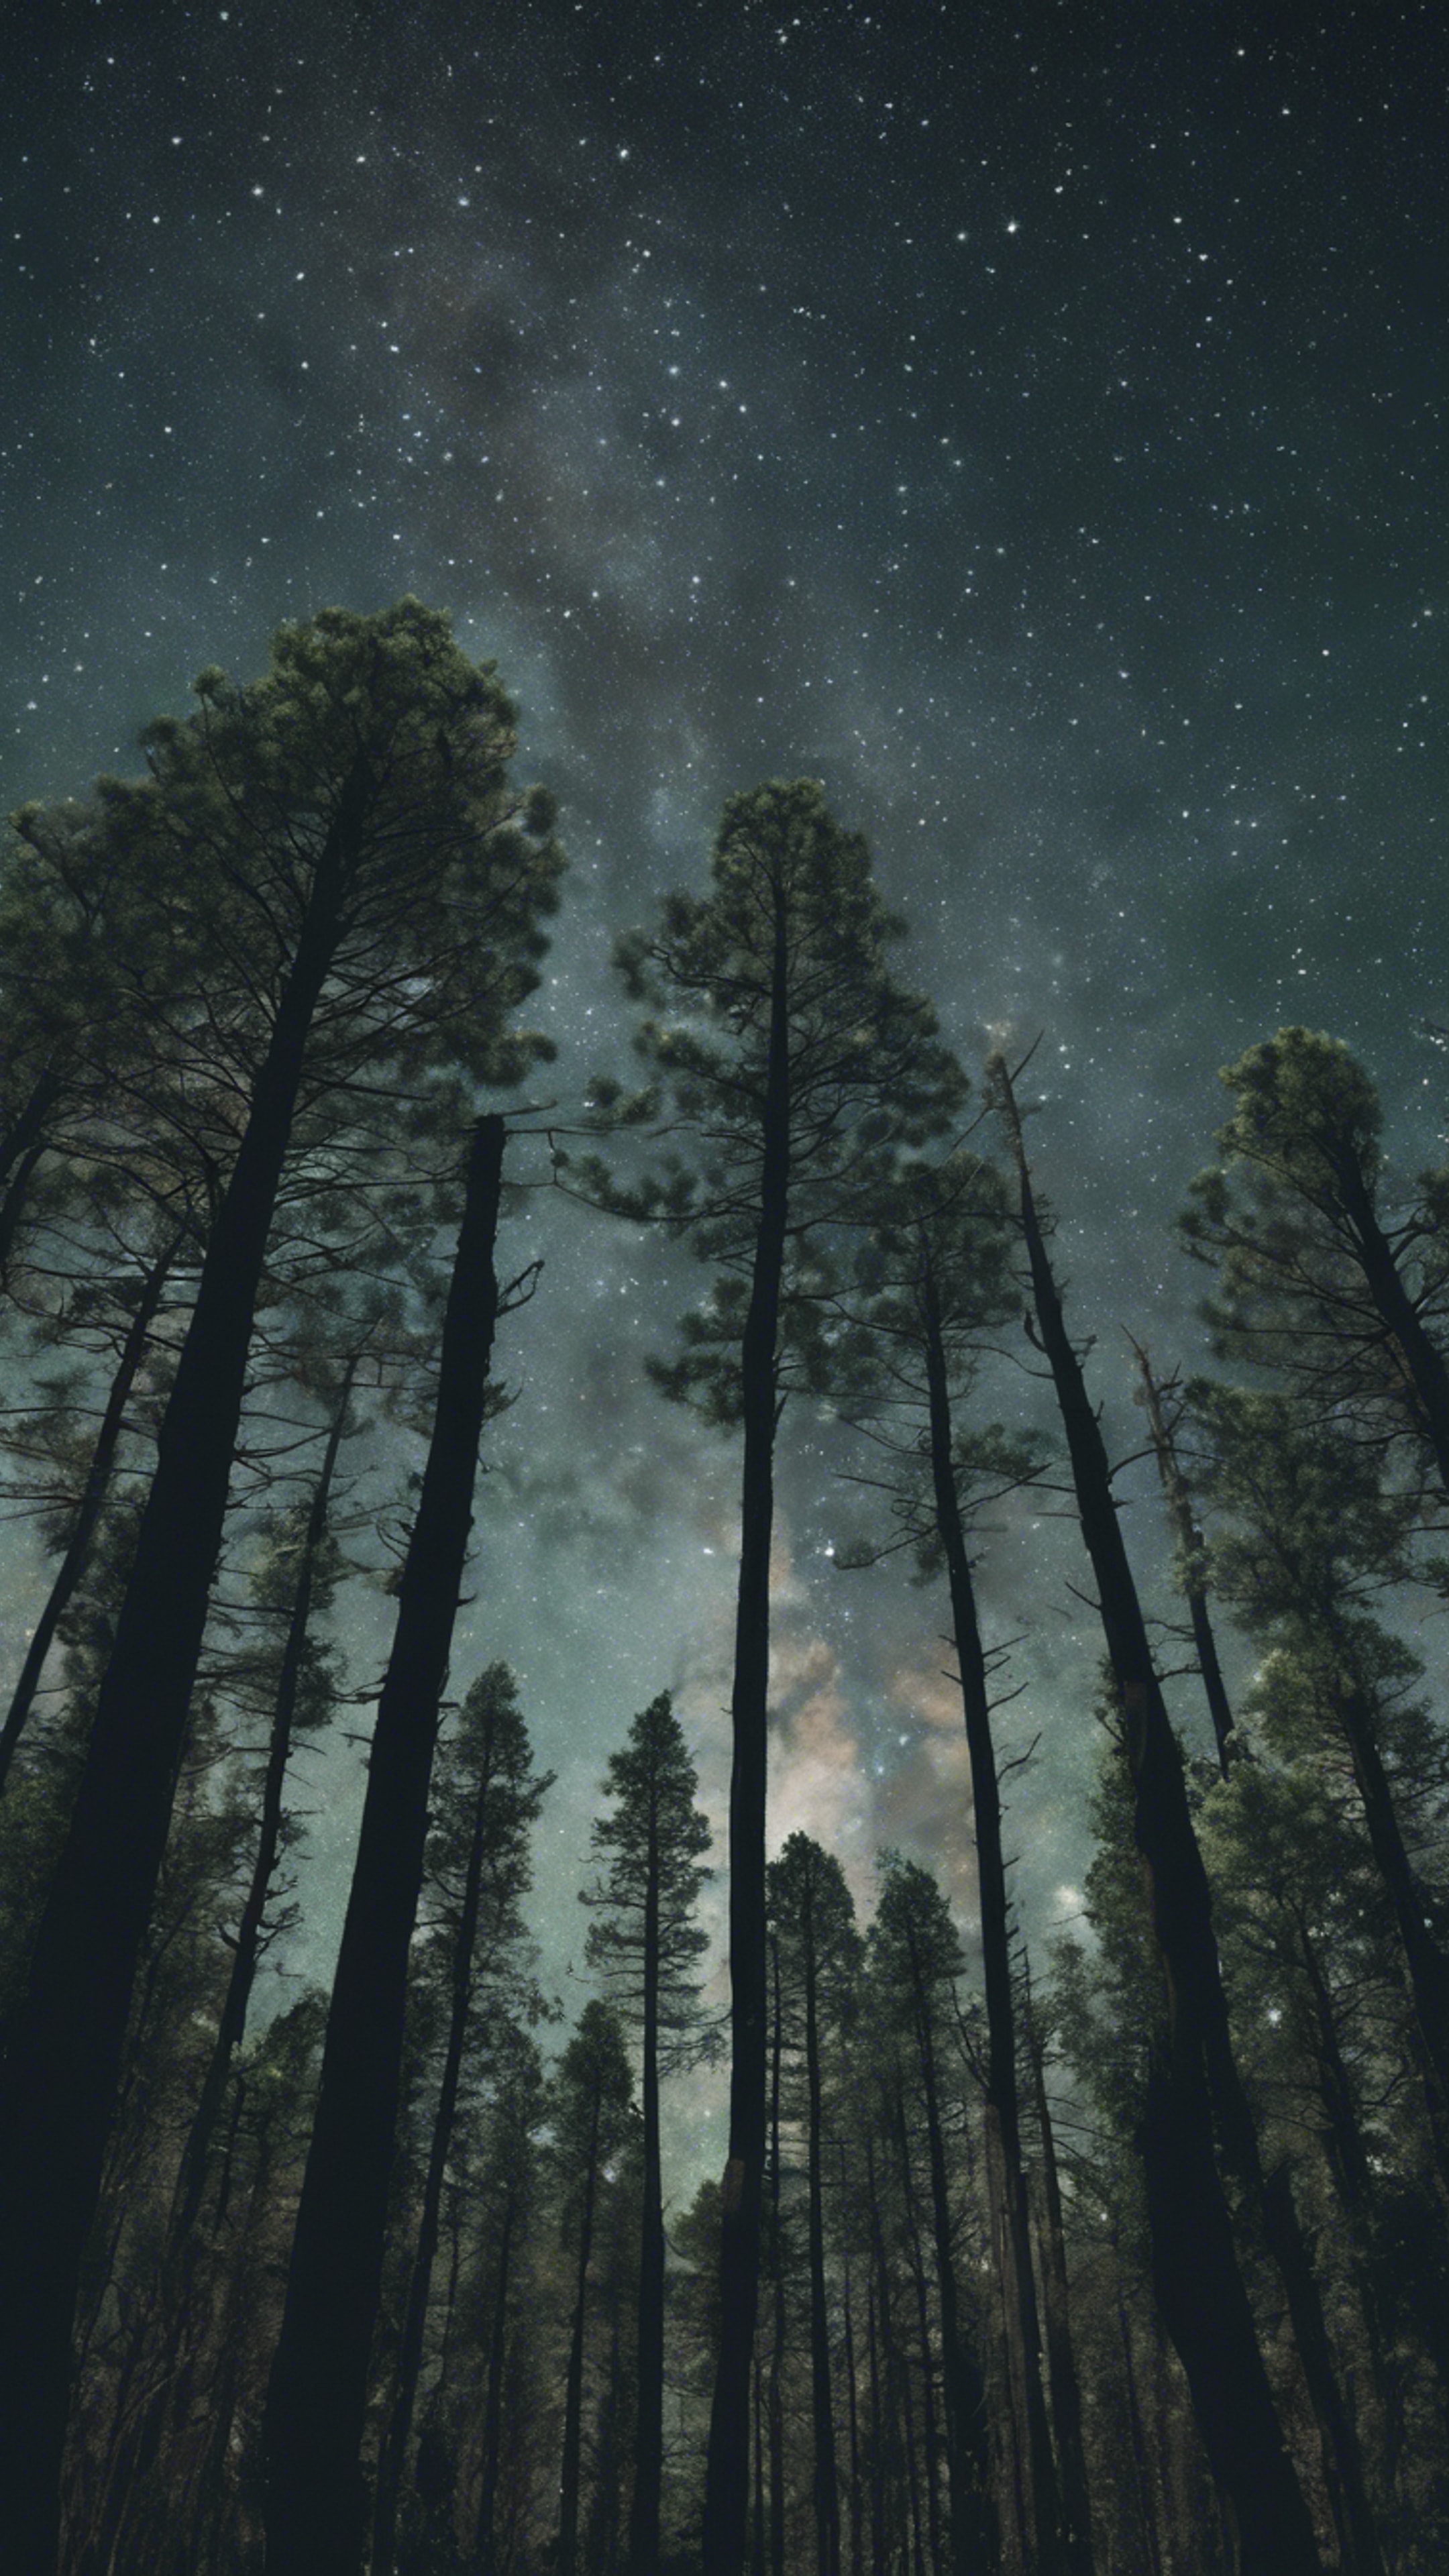 A wilderness scene with tall, dark green pine trees occluding the stars. ورق الجدران[a450718e497a48169b60]